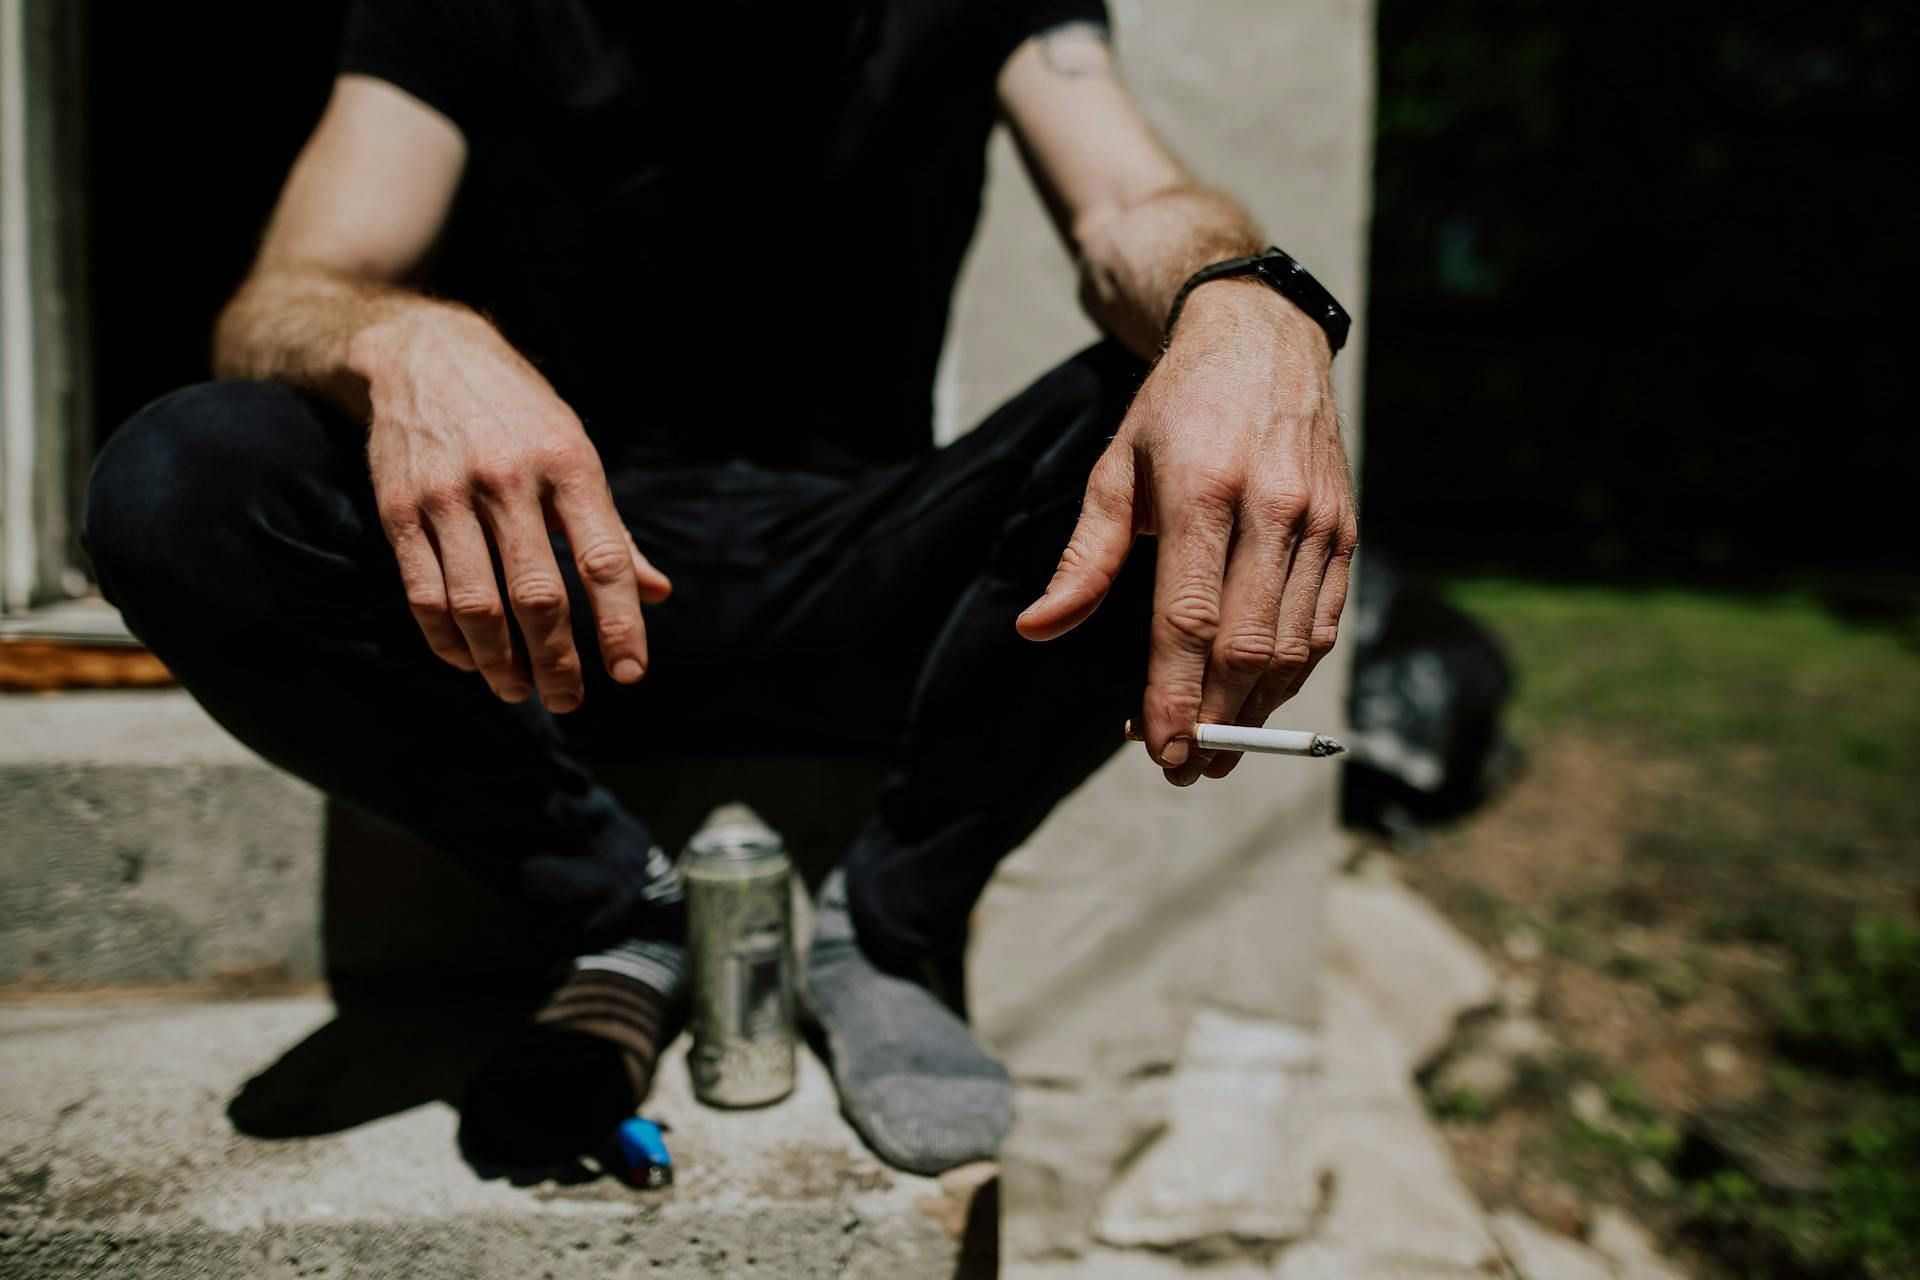 Tobacco and alcohol use can lead to serious health conditions. (Image via Pexels/Kelly)